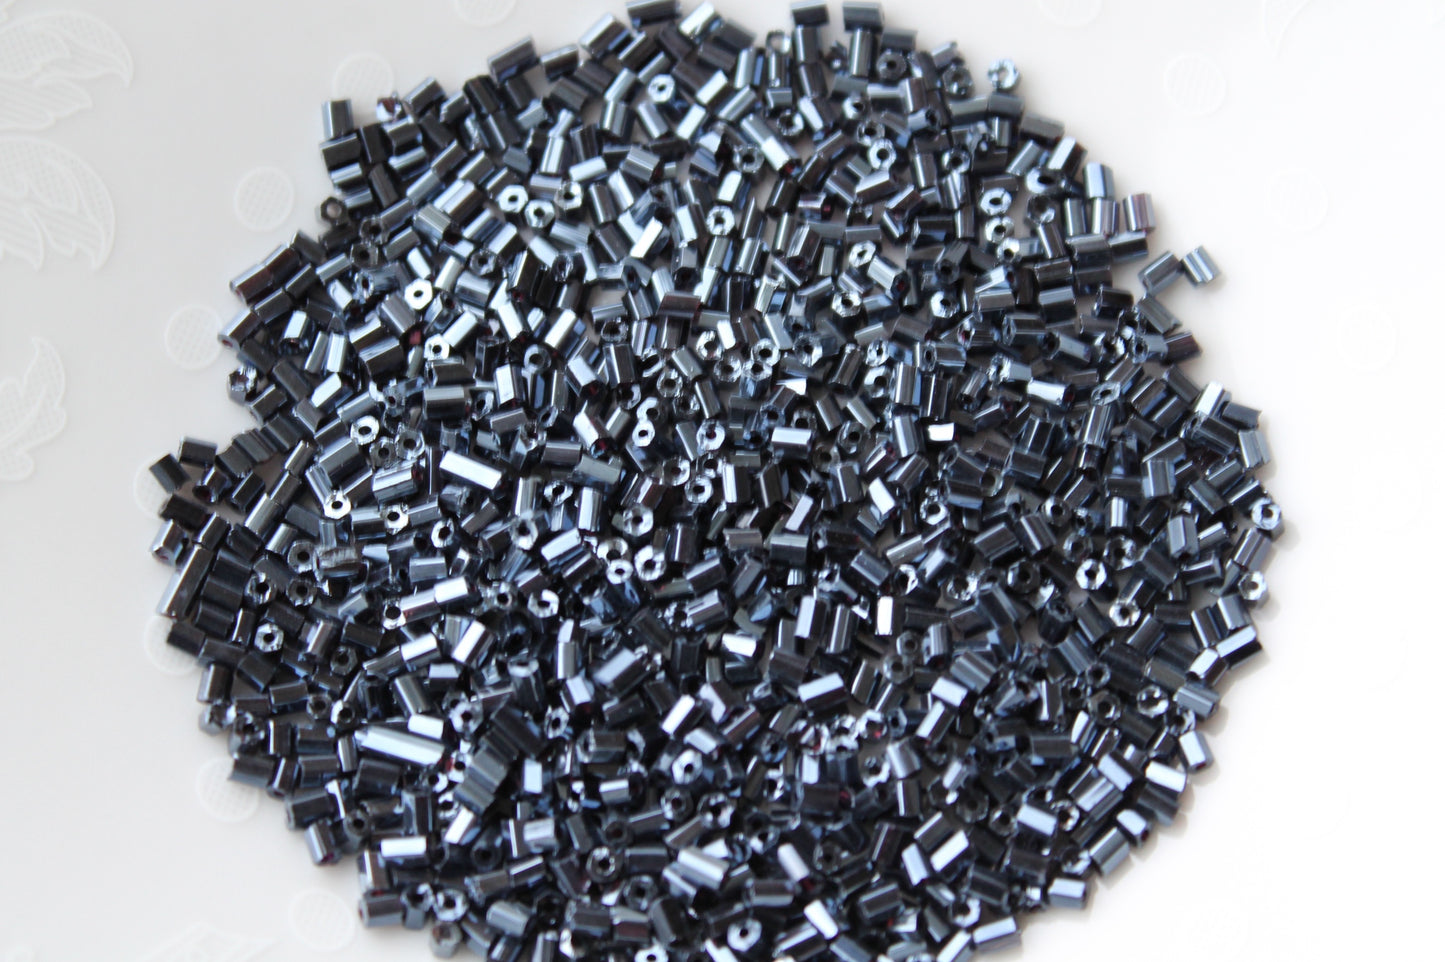 15g Two Cut Black Seed Beads